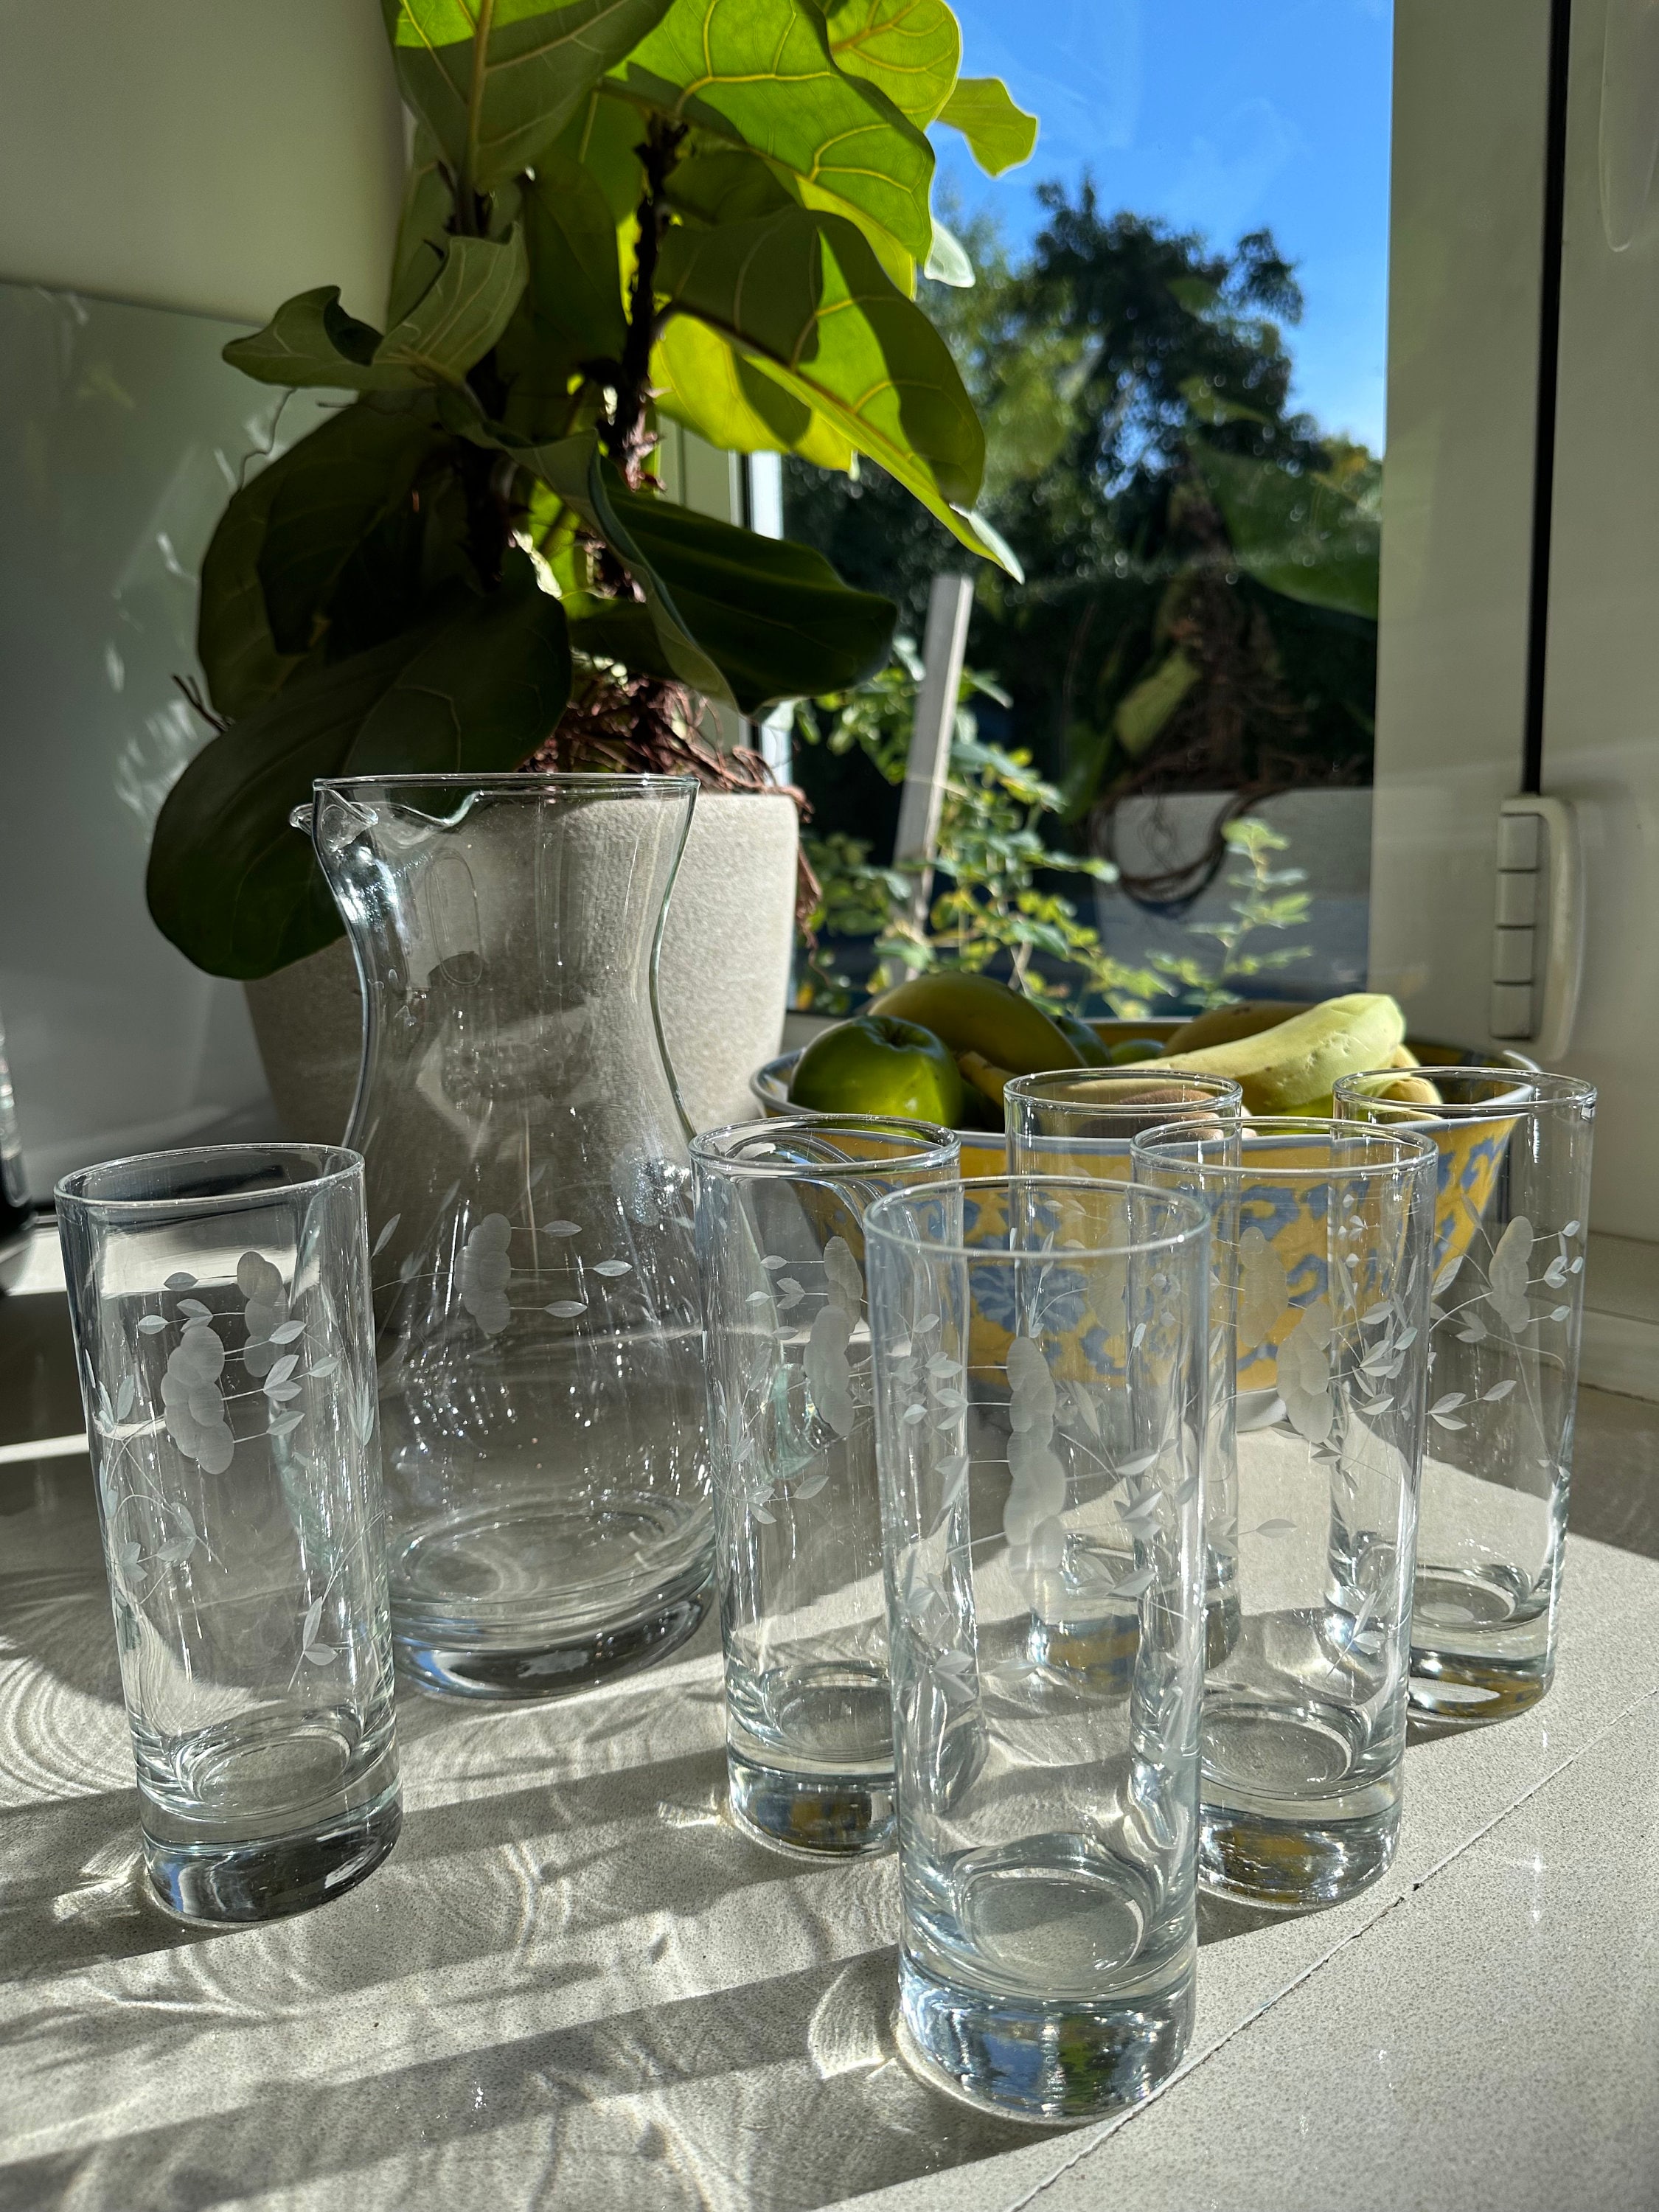 Glassique Cadeau Vintage Pineapple Lowball Glasses for Gin and Rum Cocktails | Set of 4 | 10 oz Heavy Crystal Short Old Fashioned Rocks Tumblers for